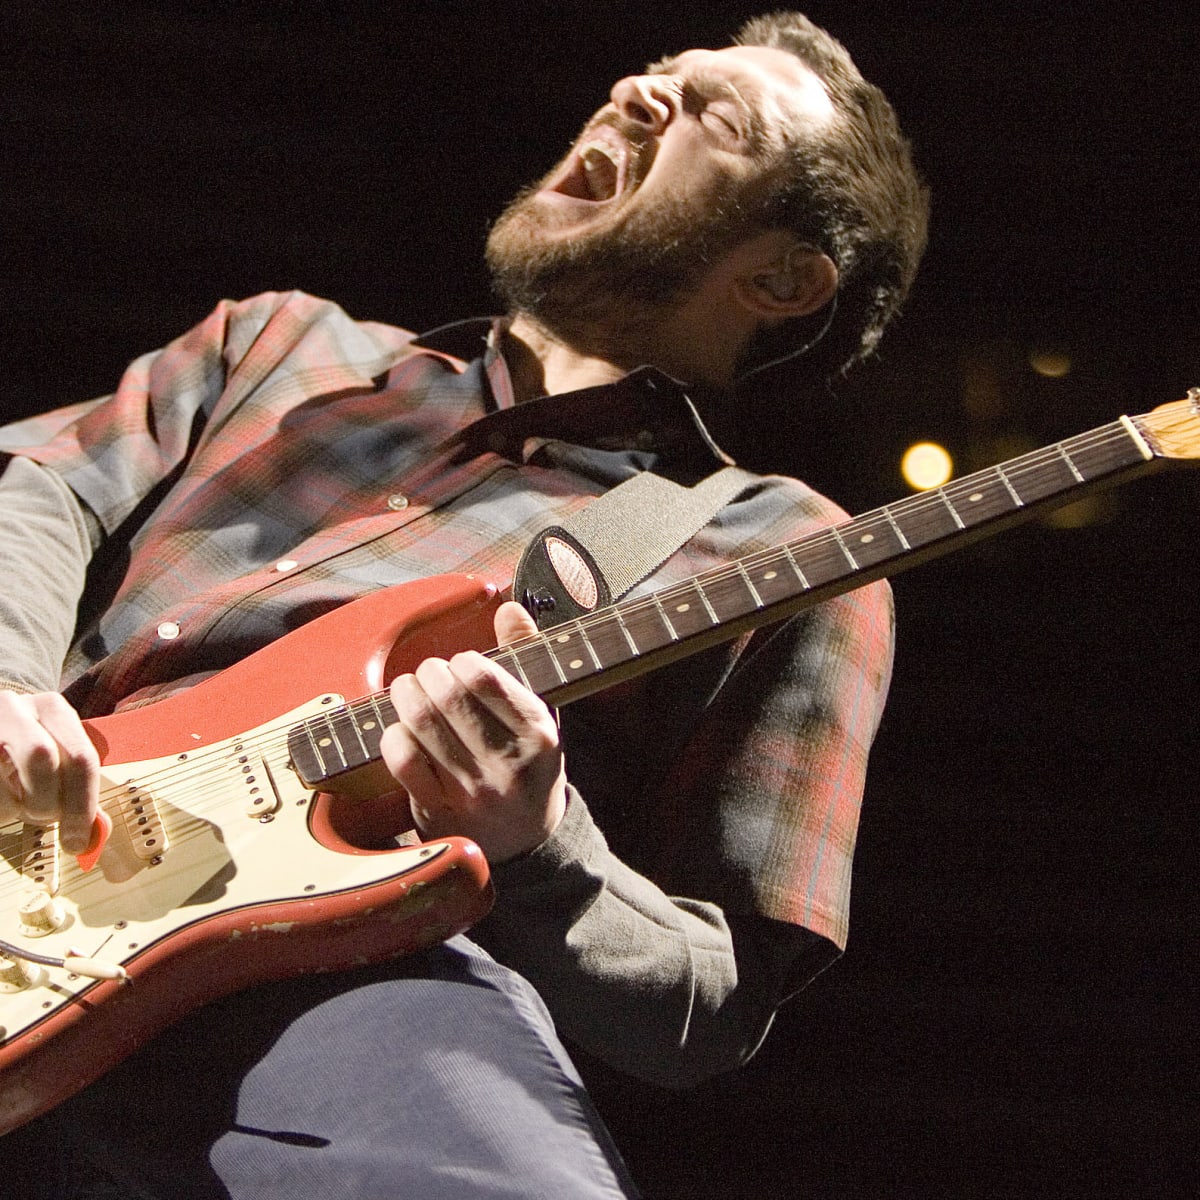 John Frusciante Says He Returned to Red Hot Chili Peppers to "Continue to Play Electronic Music" - EDM.com - The Latest Electronic Music Reviews & Artists